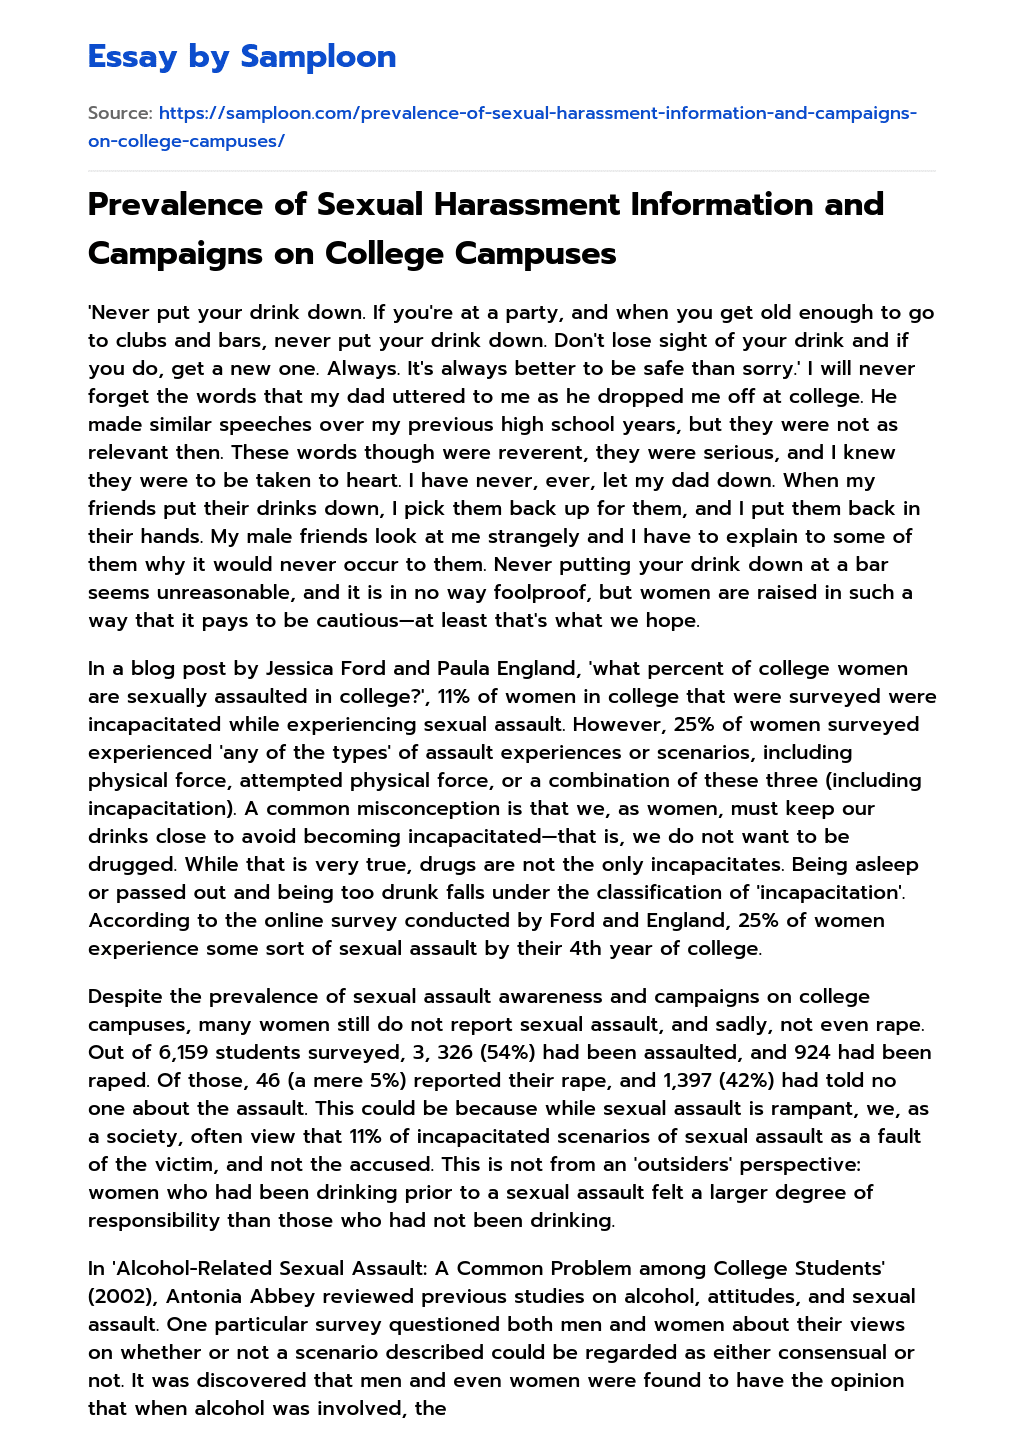 essay on sexual assault on college campuses